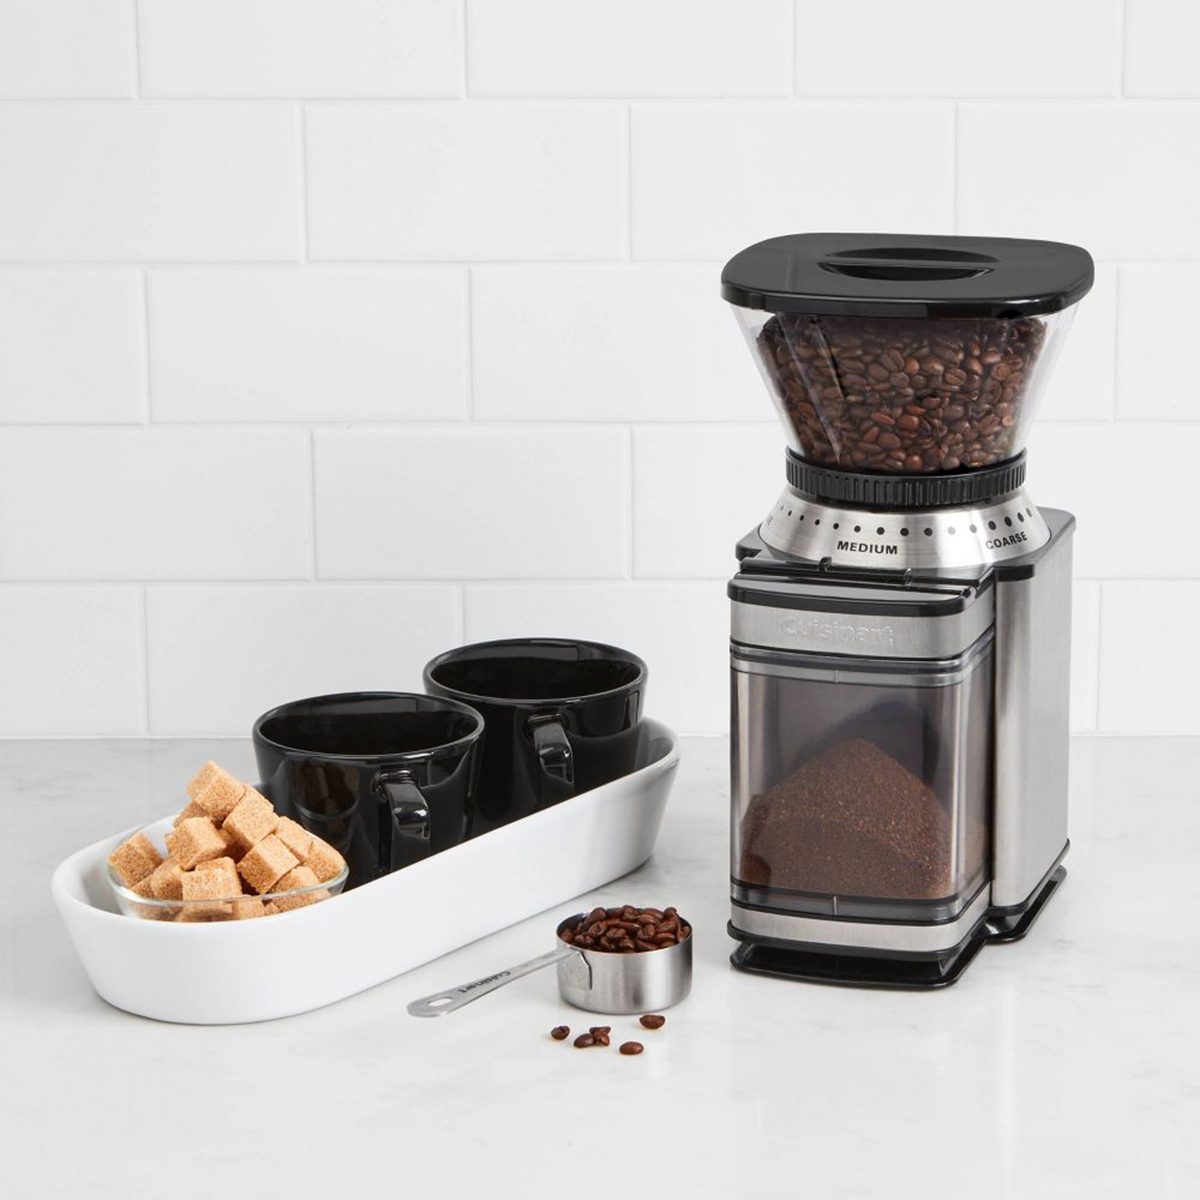 Home coffee bar accessories: 23 coffee gadgets, essentials, and other cool  products for the perfect home coff…